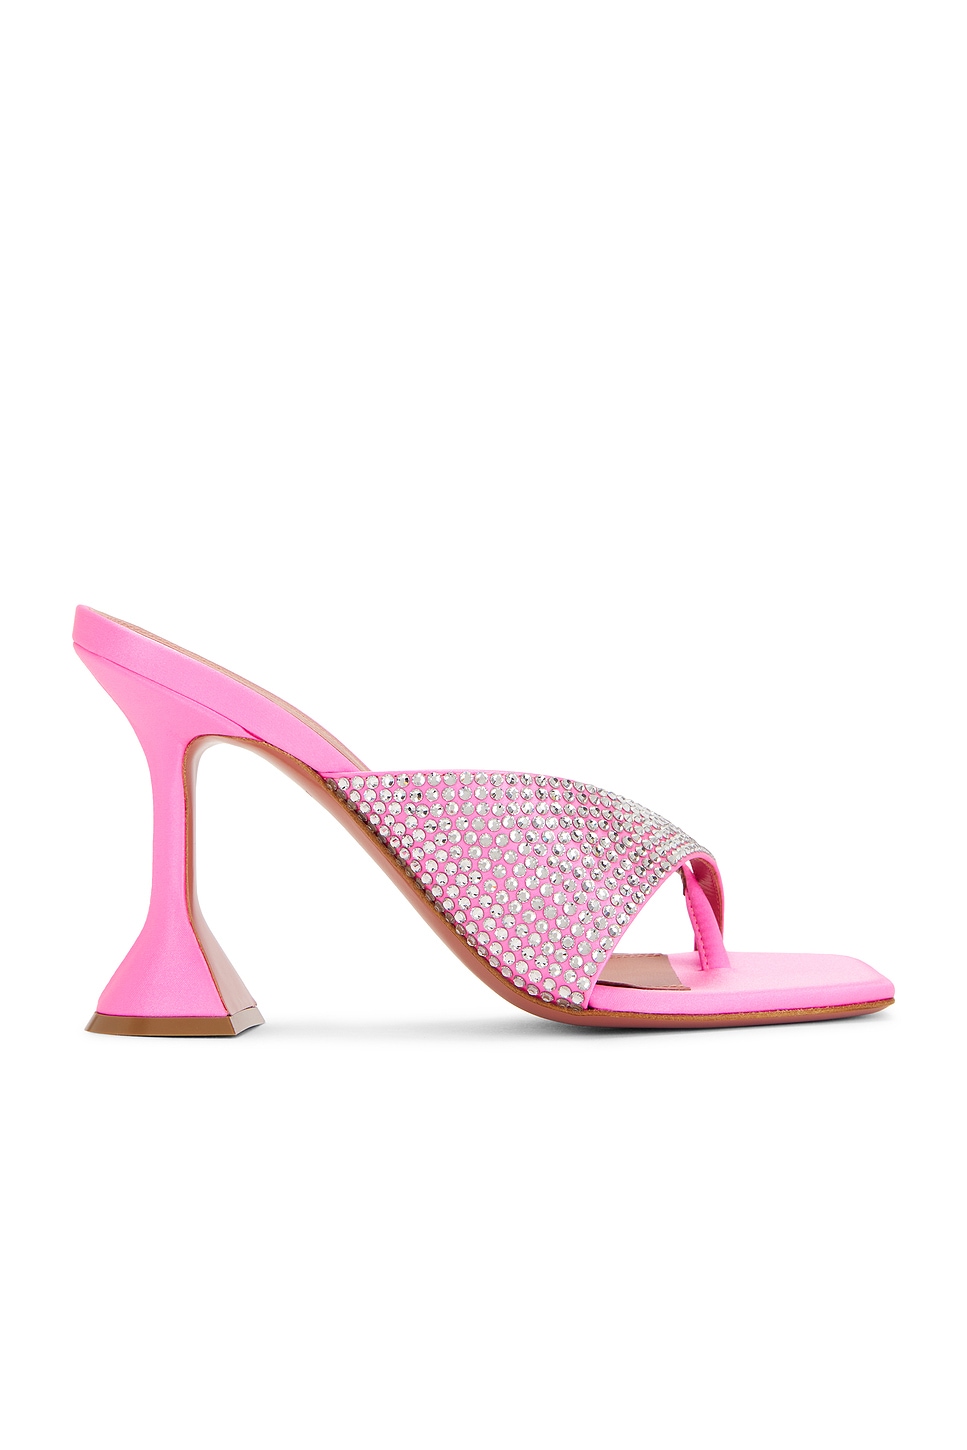 Shiona 95 Slipper In Fluo Pink & White Crystals in Pink